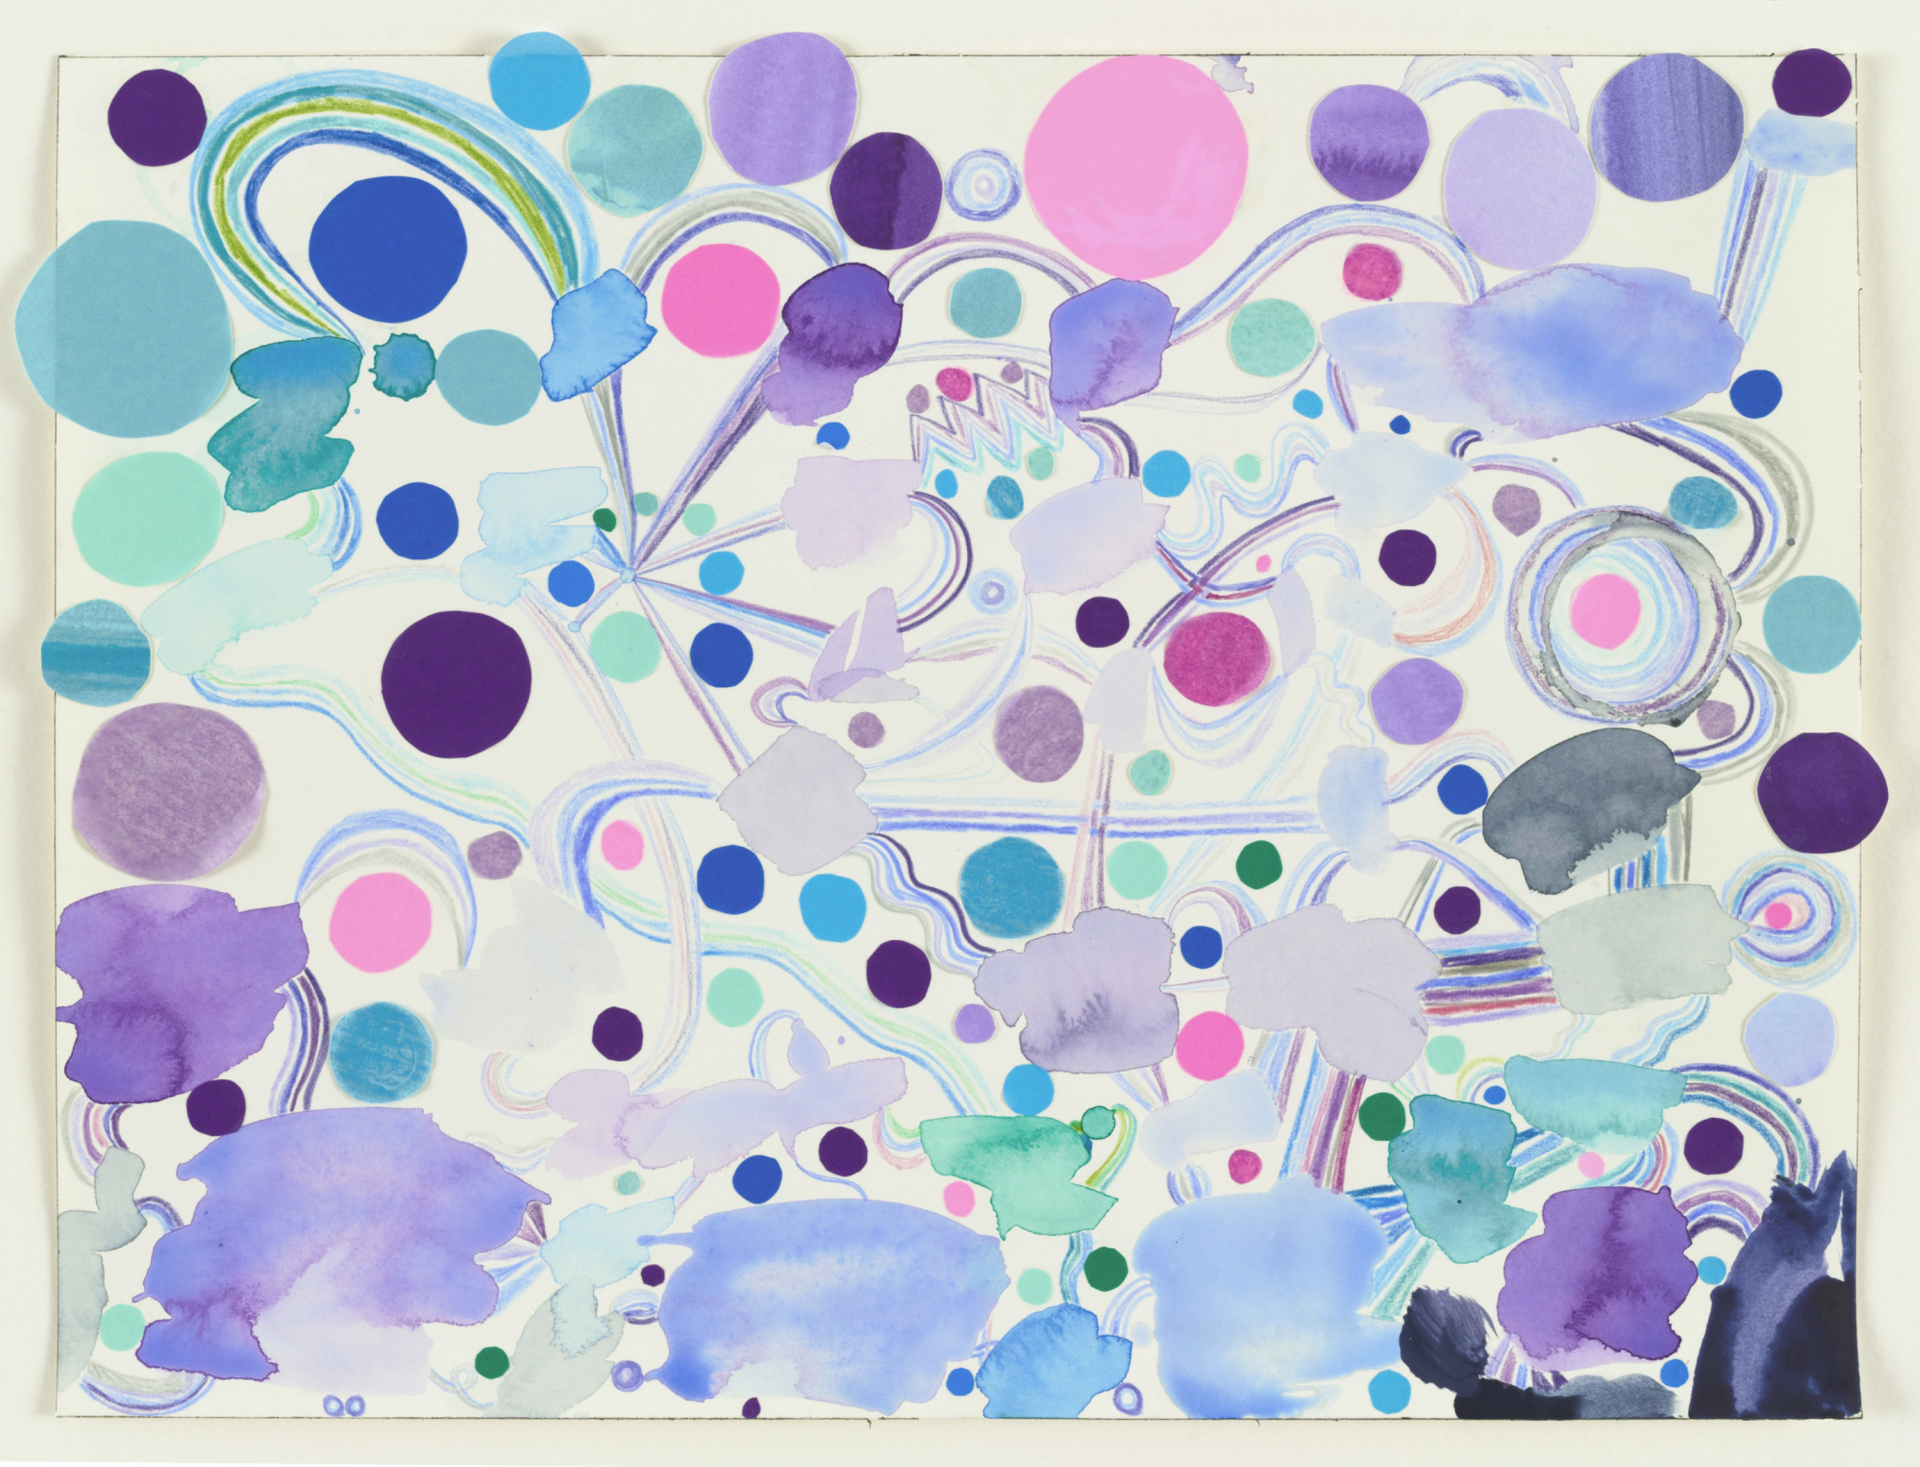 Abstract painting "Untitled" by Laura Owens, 2003, featuring a constellation composition with floating shapes and forms in blues, purples, and pinks, creating a lively and interconnected visual experience.